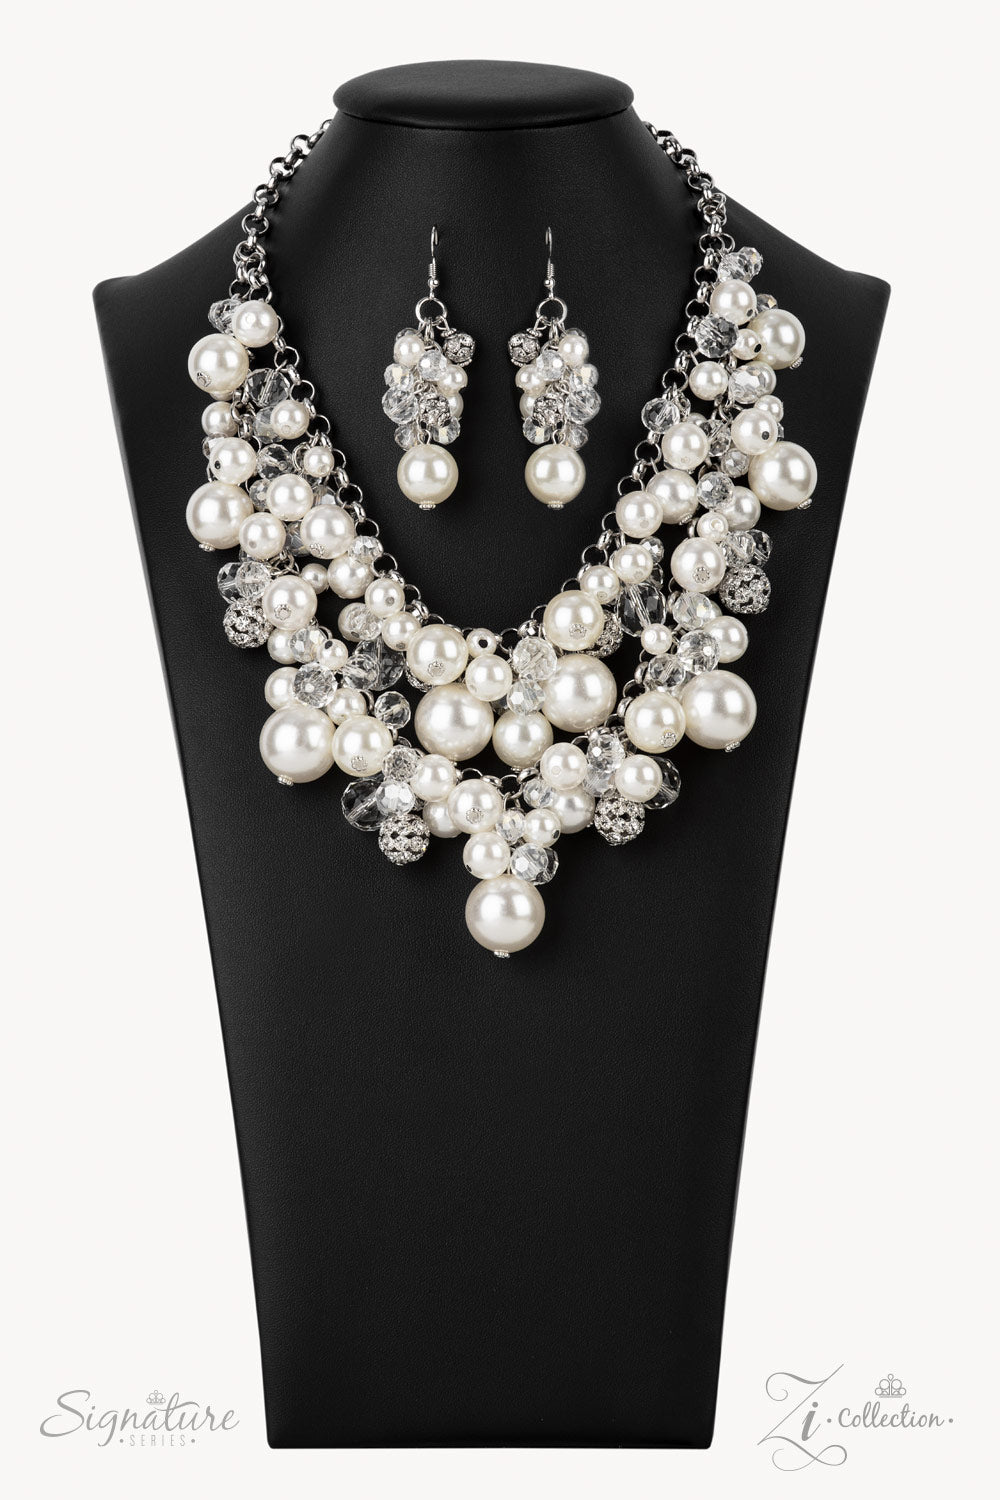 Accessory of the Day #aotd #abloom #zicollection #perfectgift  #treatyourself Paparazzi Zi Collection $25.00 includes … | Paparazzi jewelry,  Necklace, Silver beads